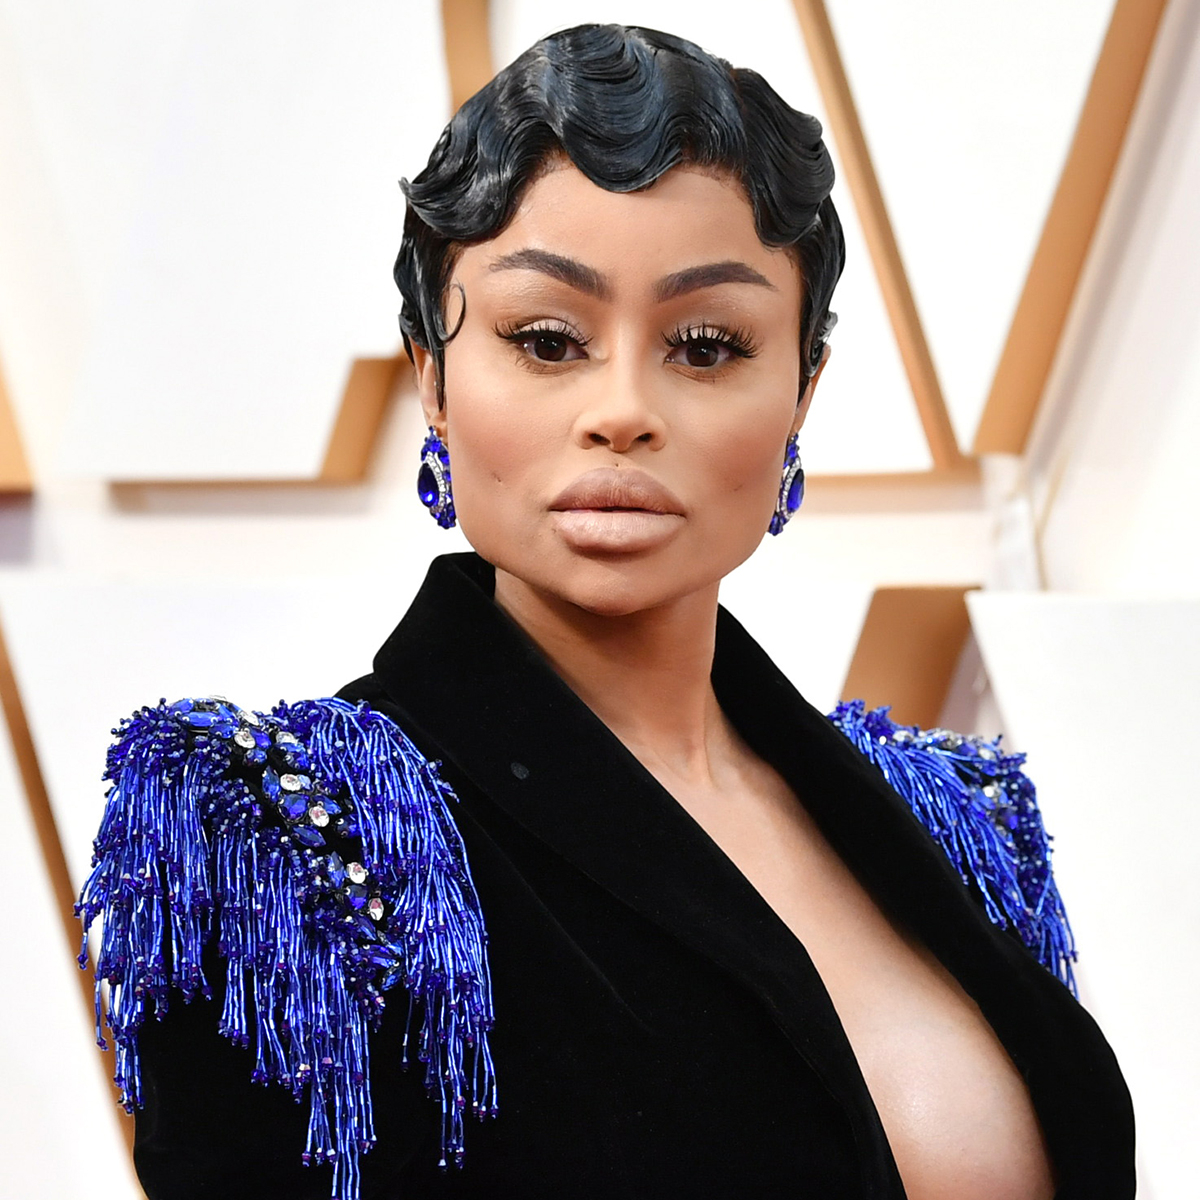 Blac Chyna Removes Breast Implants & Silicone Butt Injections